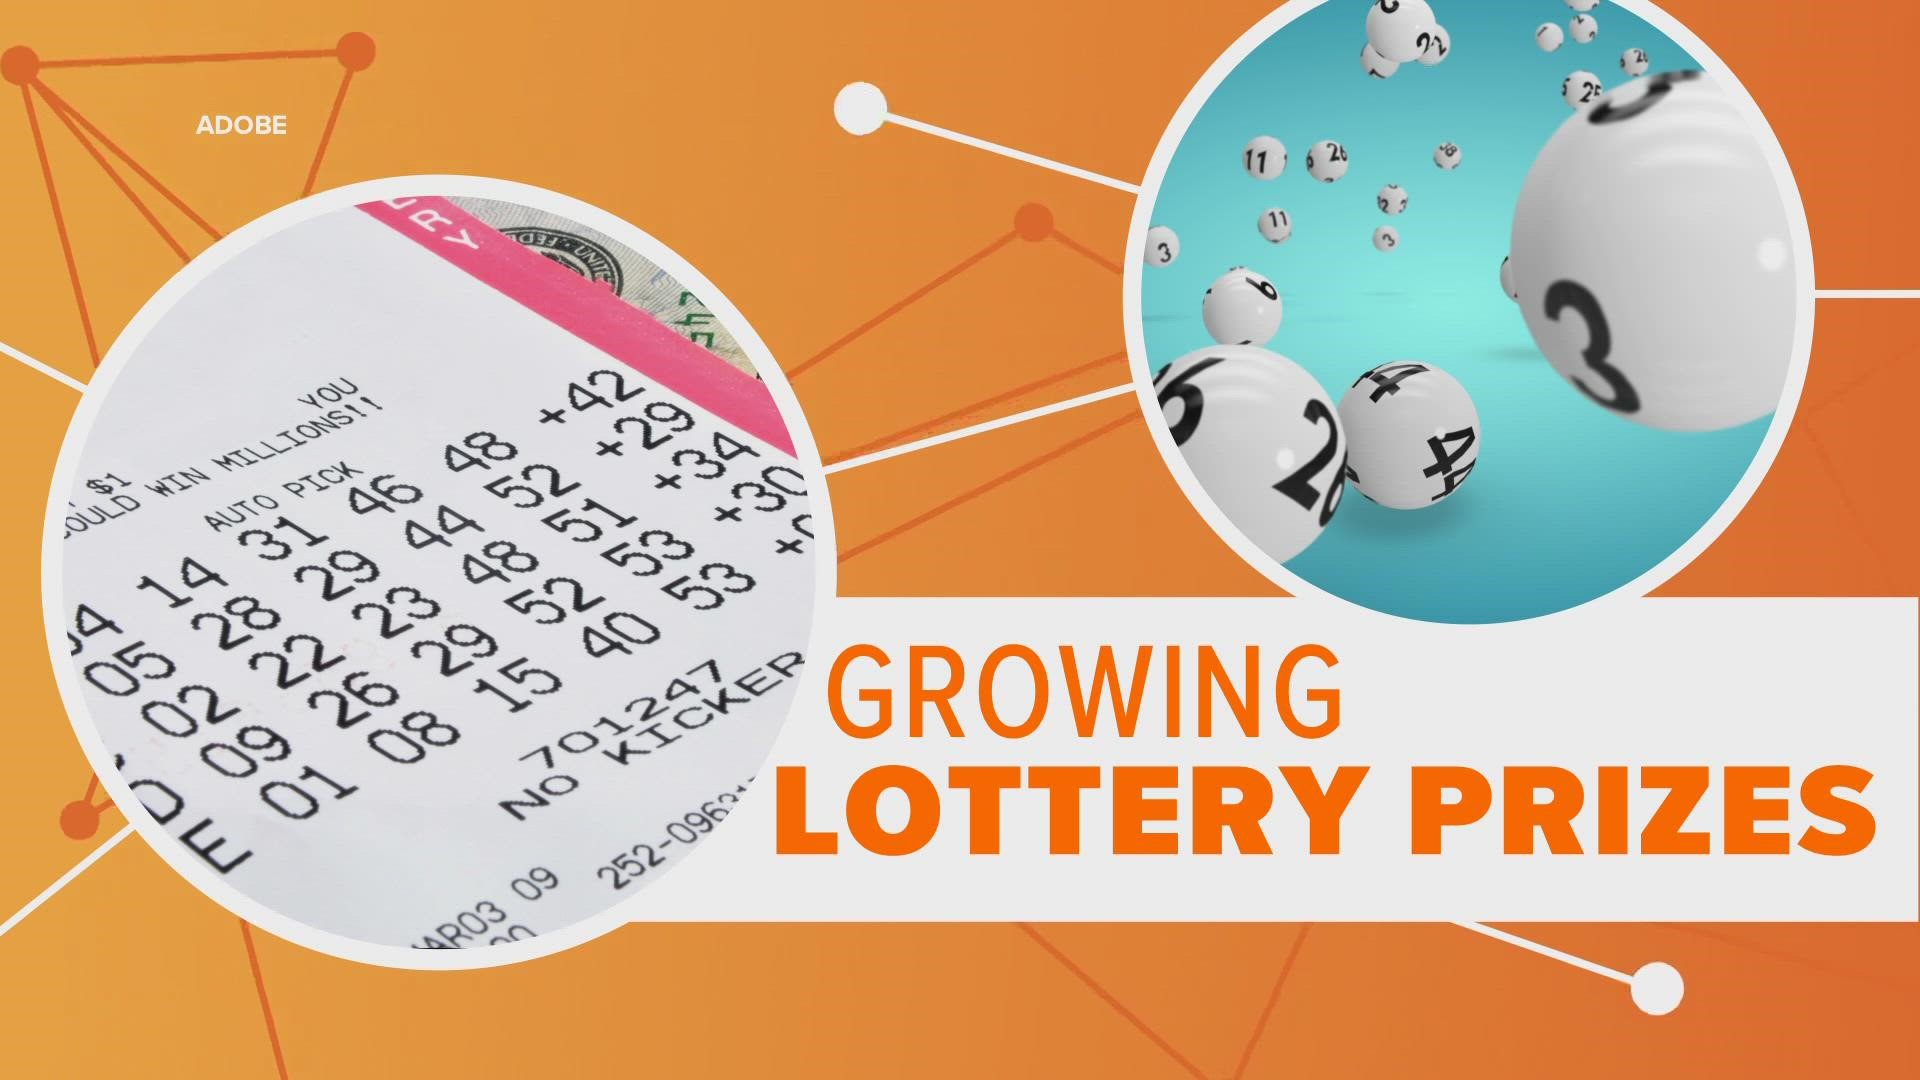 Why have recent lottery jackpots grown so much over the past few years? We take a closer look at the trend.